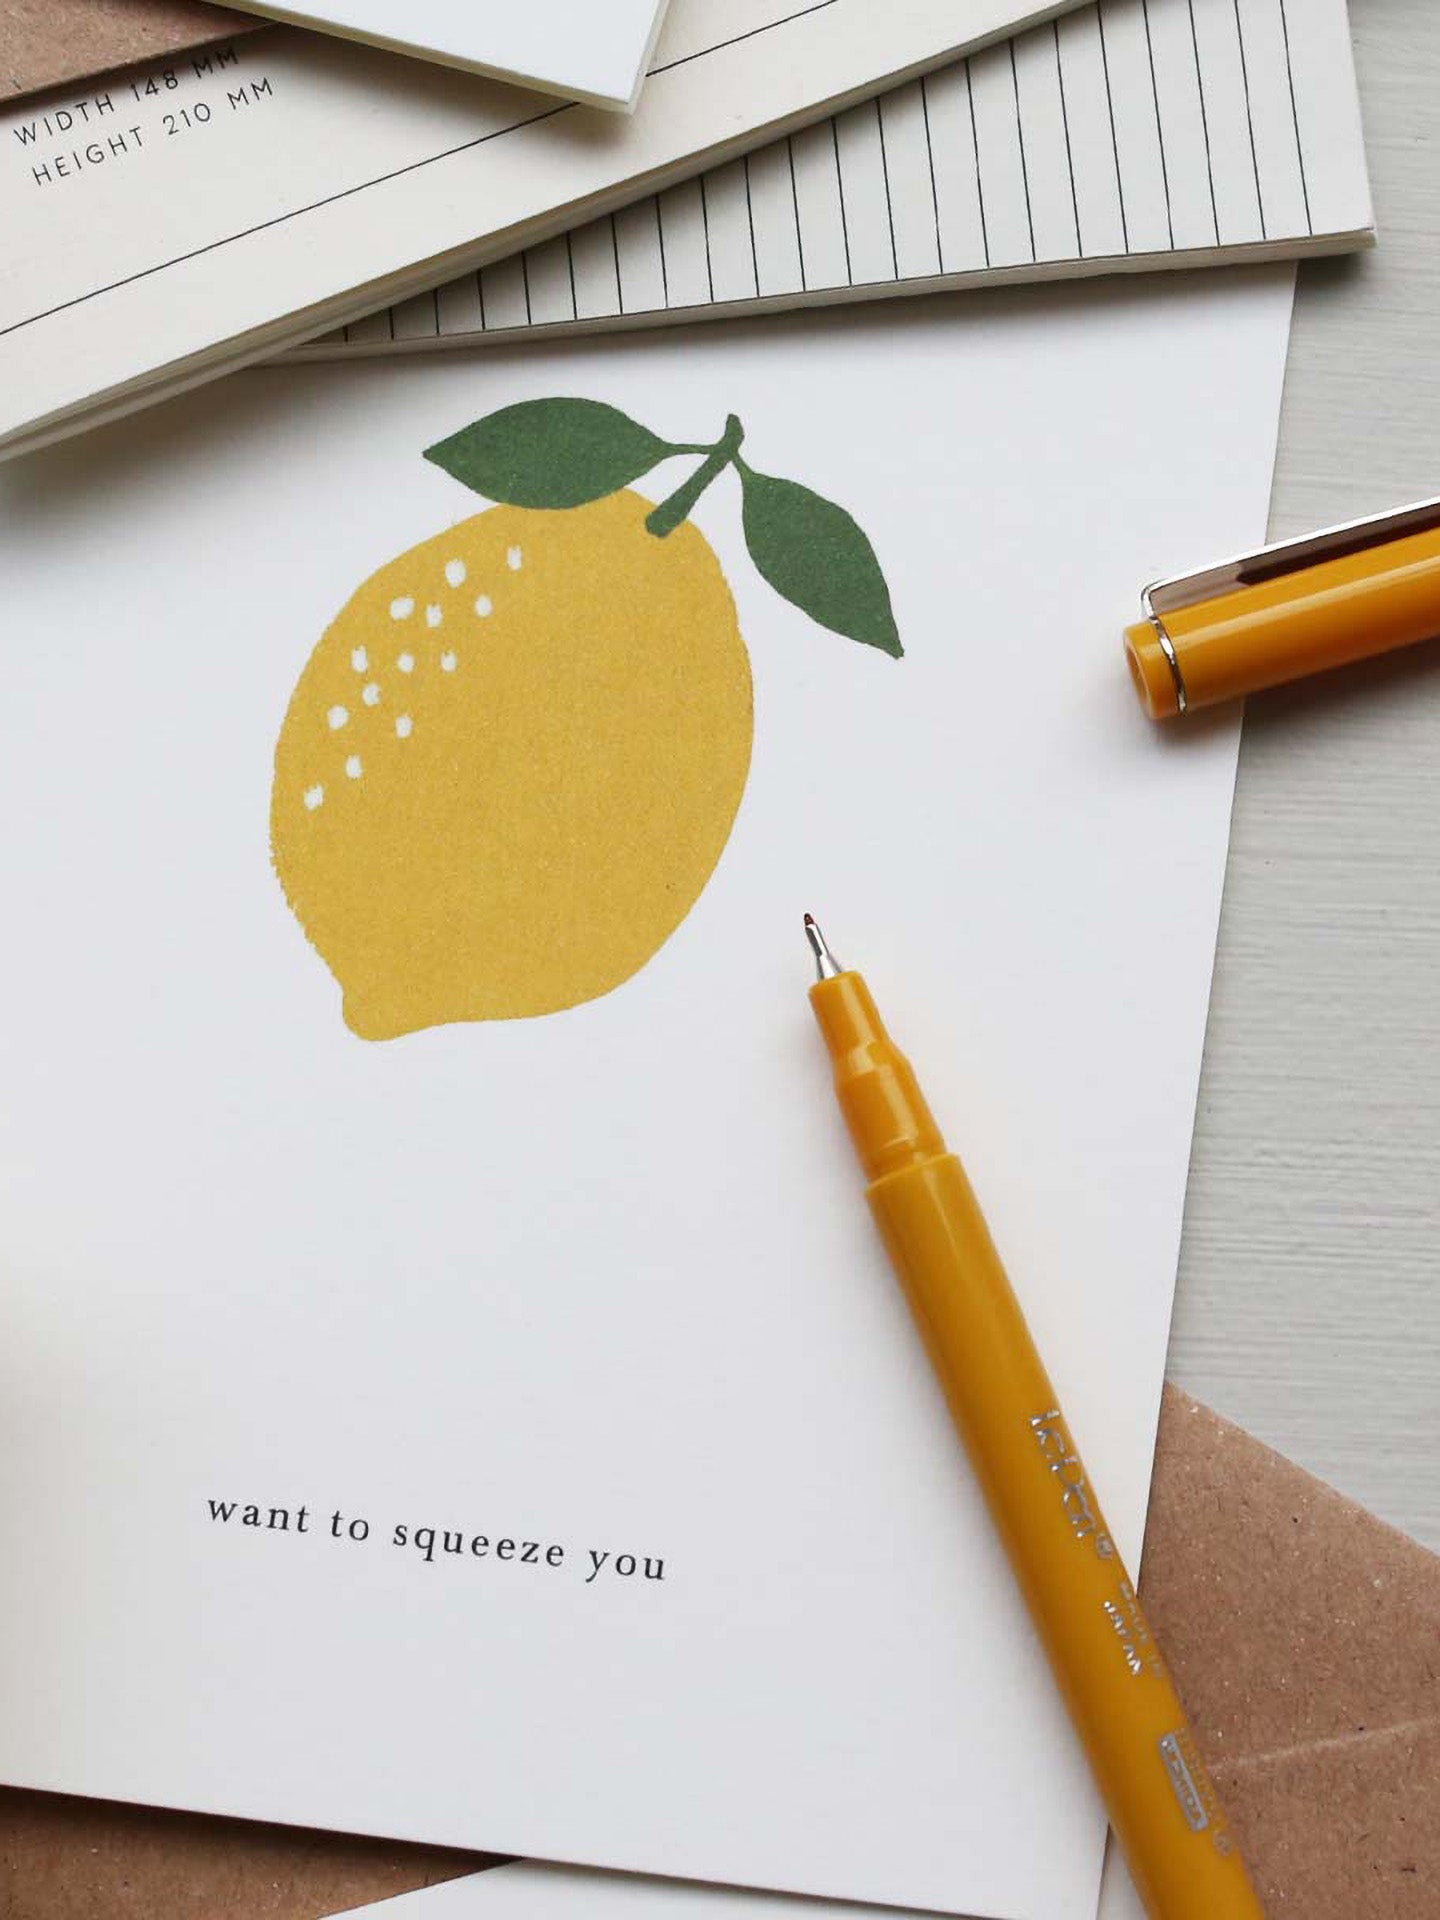 Lemon card (want to squeeze you) love card